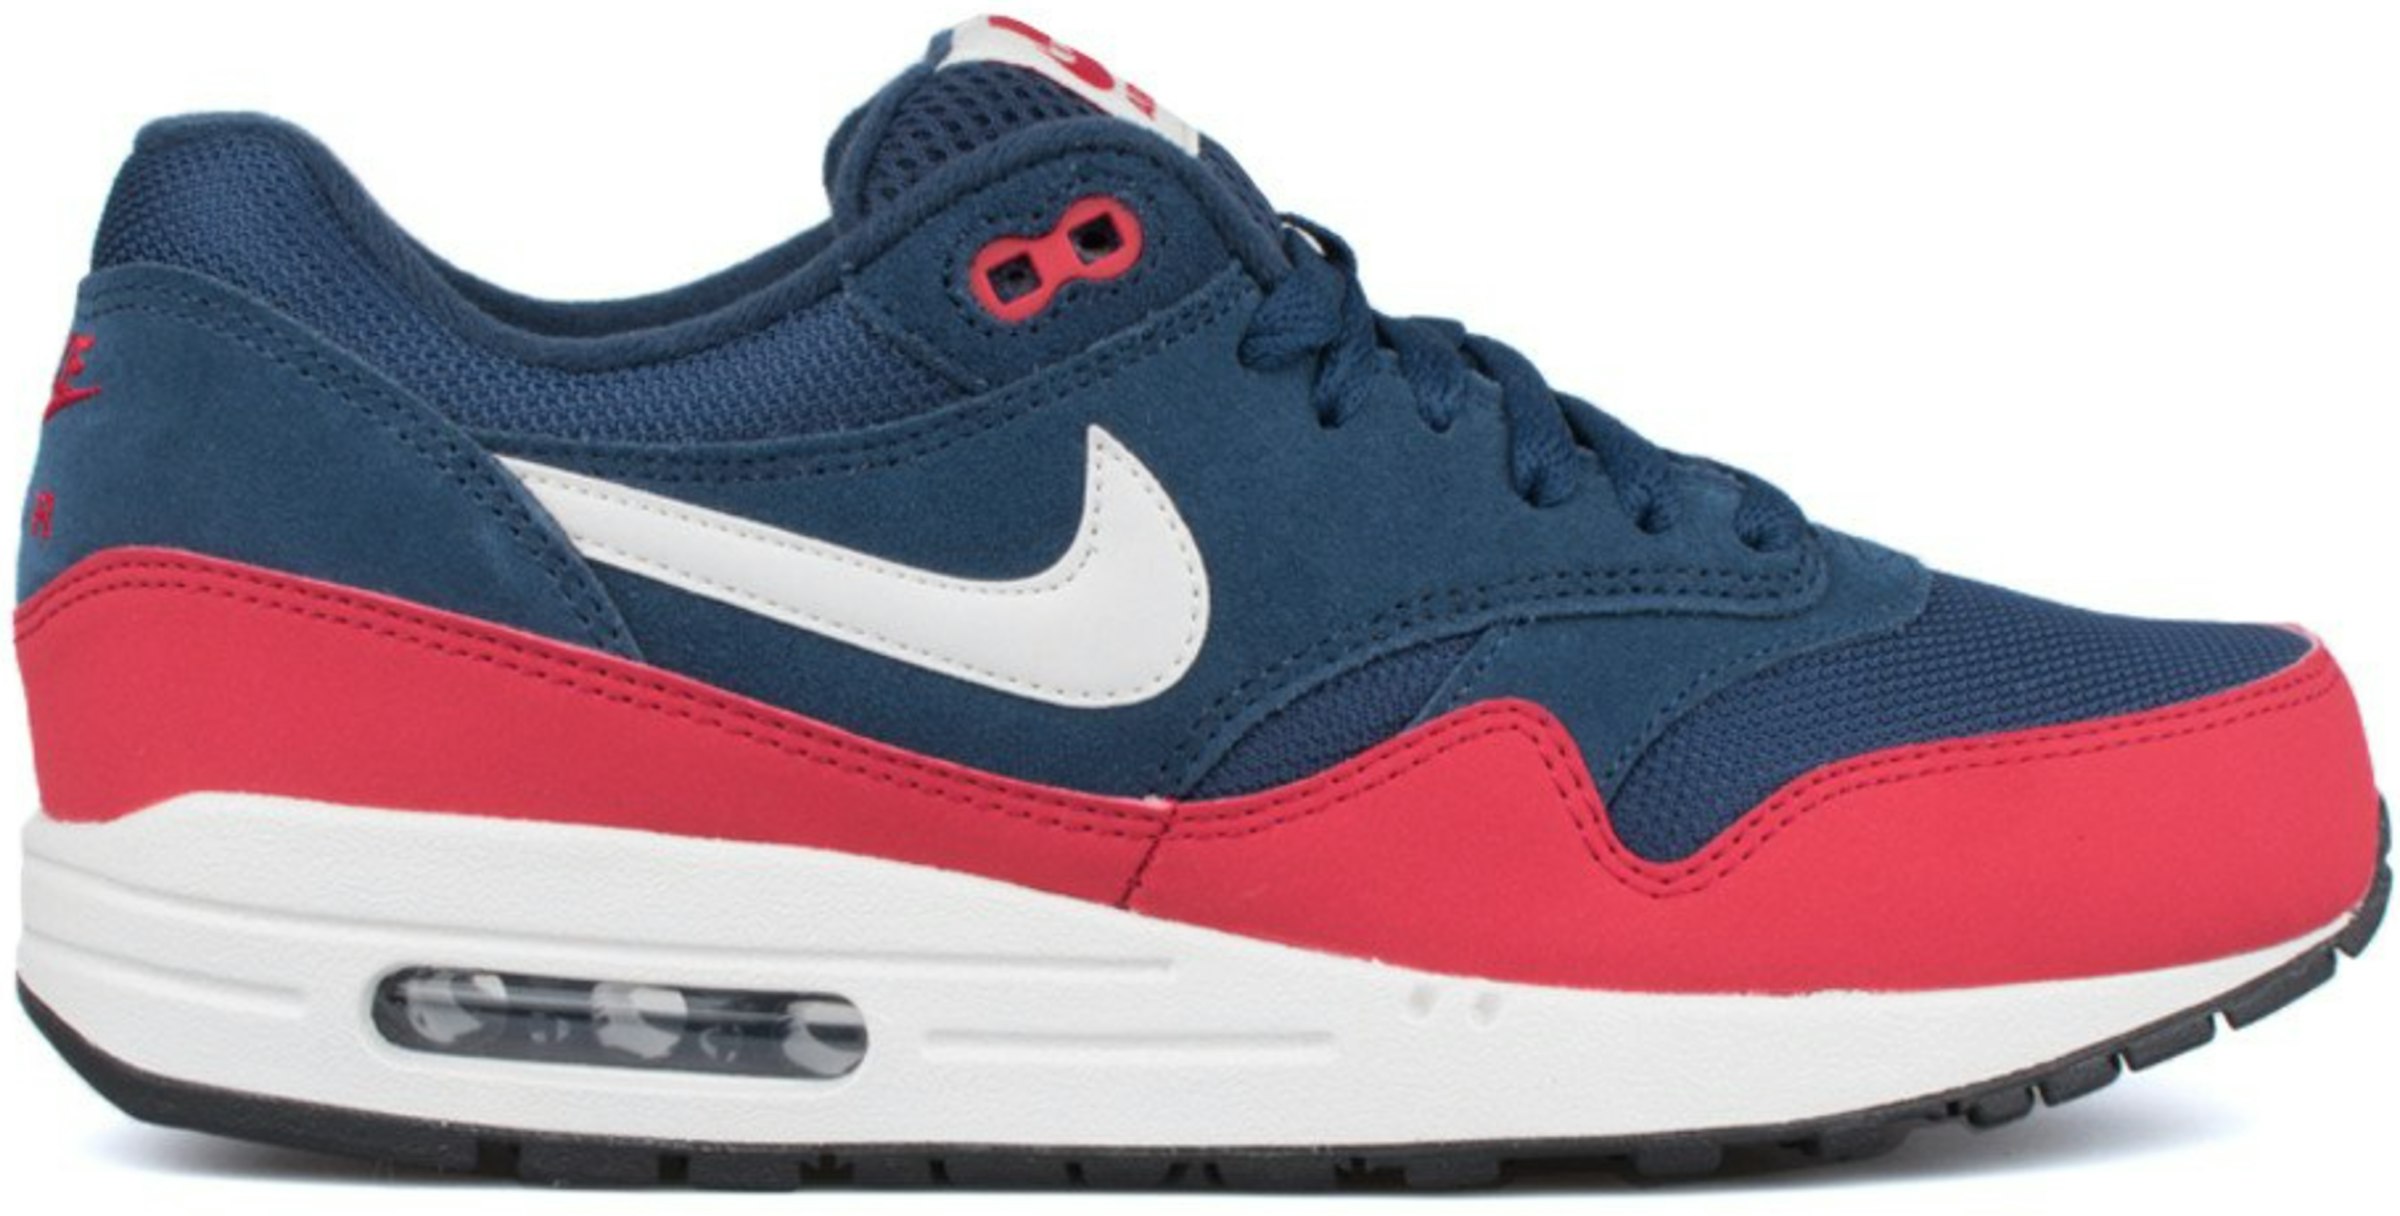 Nike Air Max 1 Midnight Red Men's - 537383-400 - US